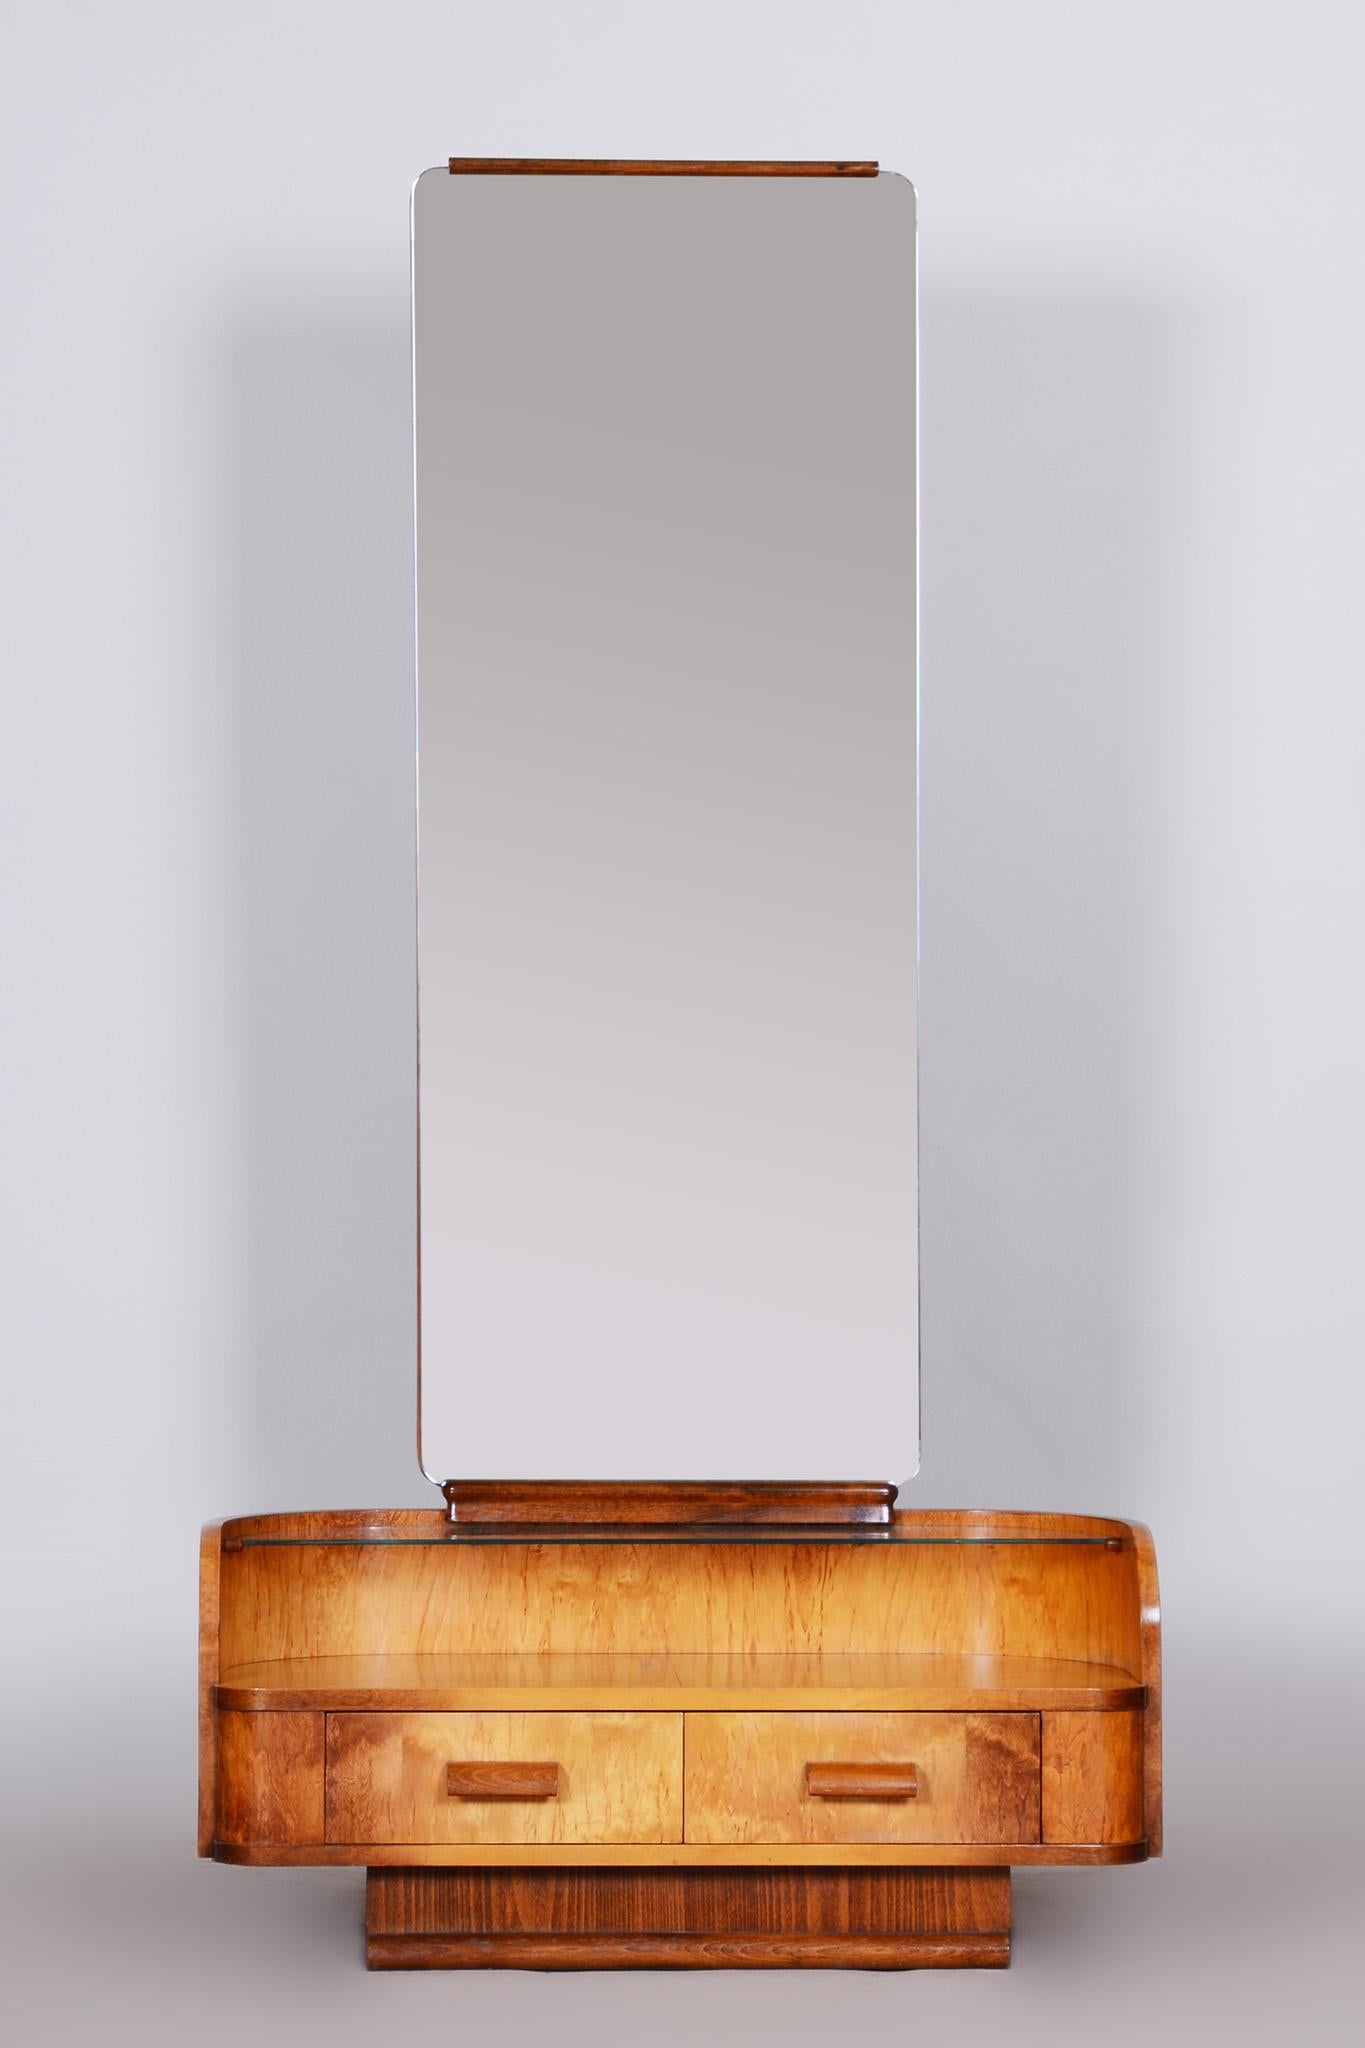 Art Deco mirror
Period: 1930 - 1939
Material: Combination of maple and walnut veneer.

Designed by Jindrich Halabala, renowned designer credited with ushering in the mass market production of furniture in his native Czechoslovakia. 

Made by